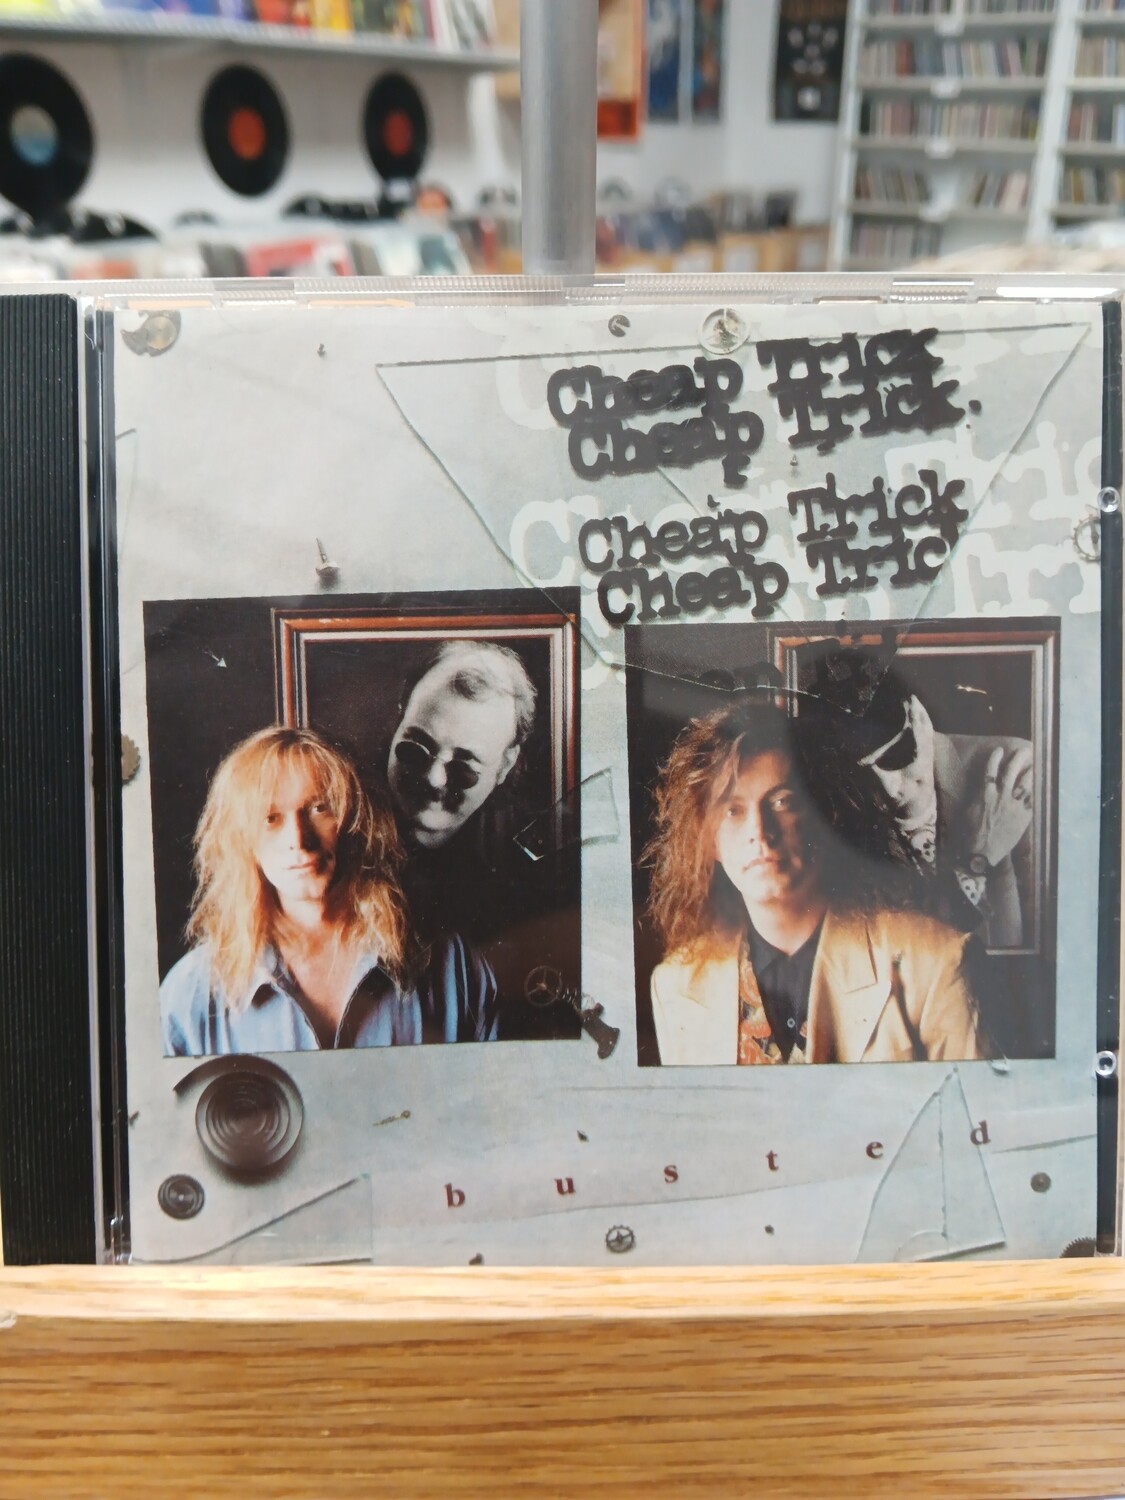 CHEAP TRICK - Busted (CD)